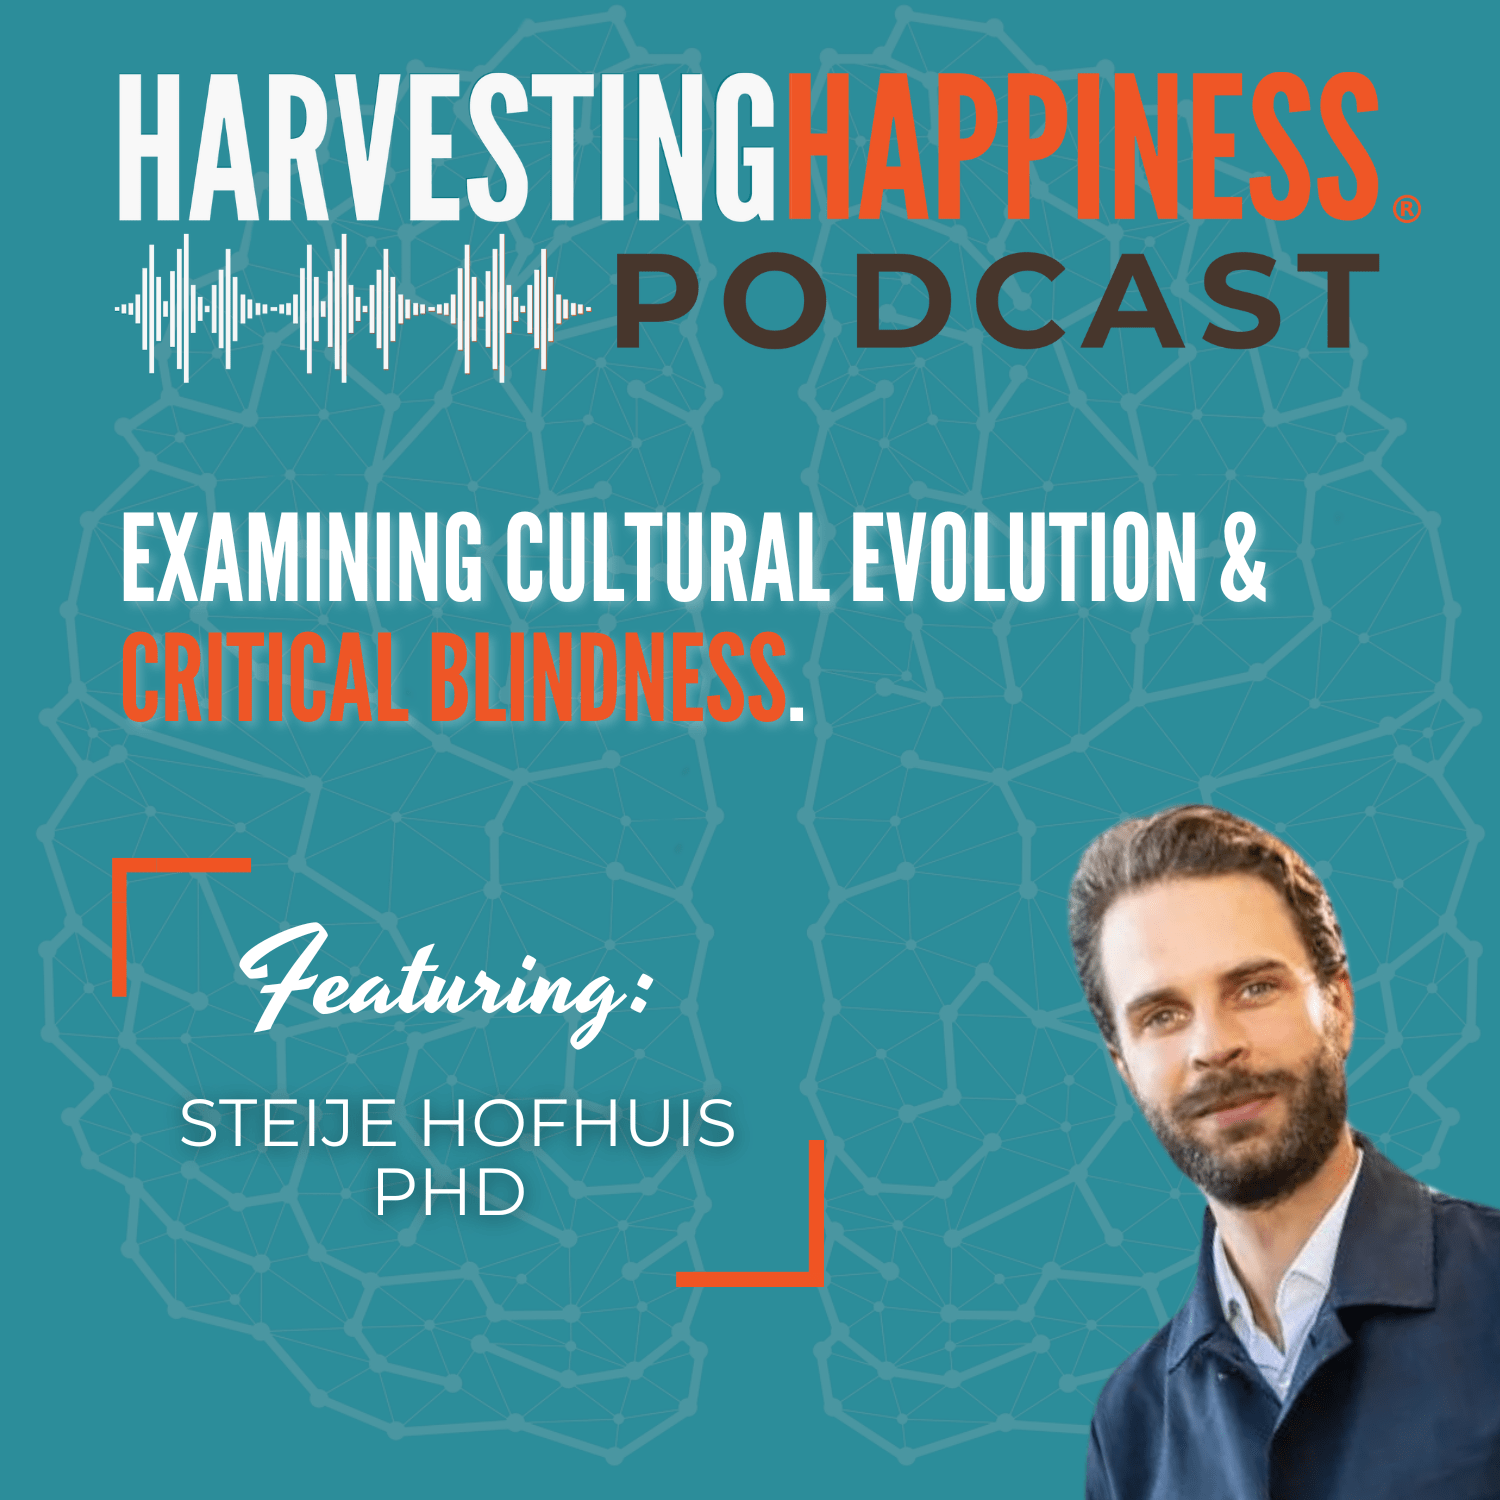 Examining Cultural Evolution and Critical Blindness with Steije Hofhuis PhD